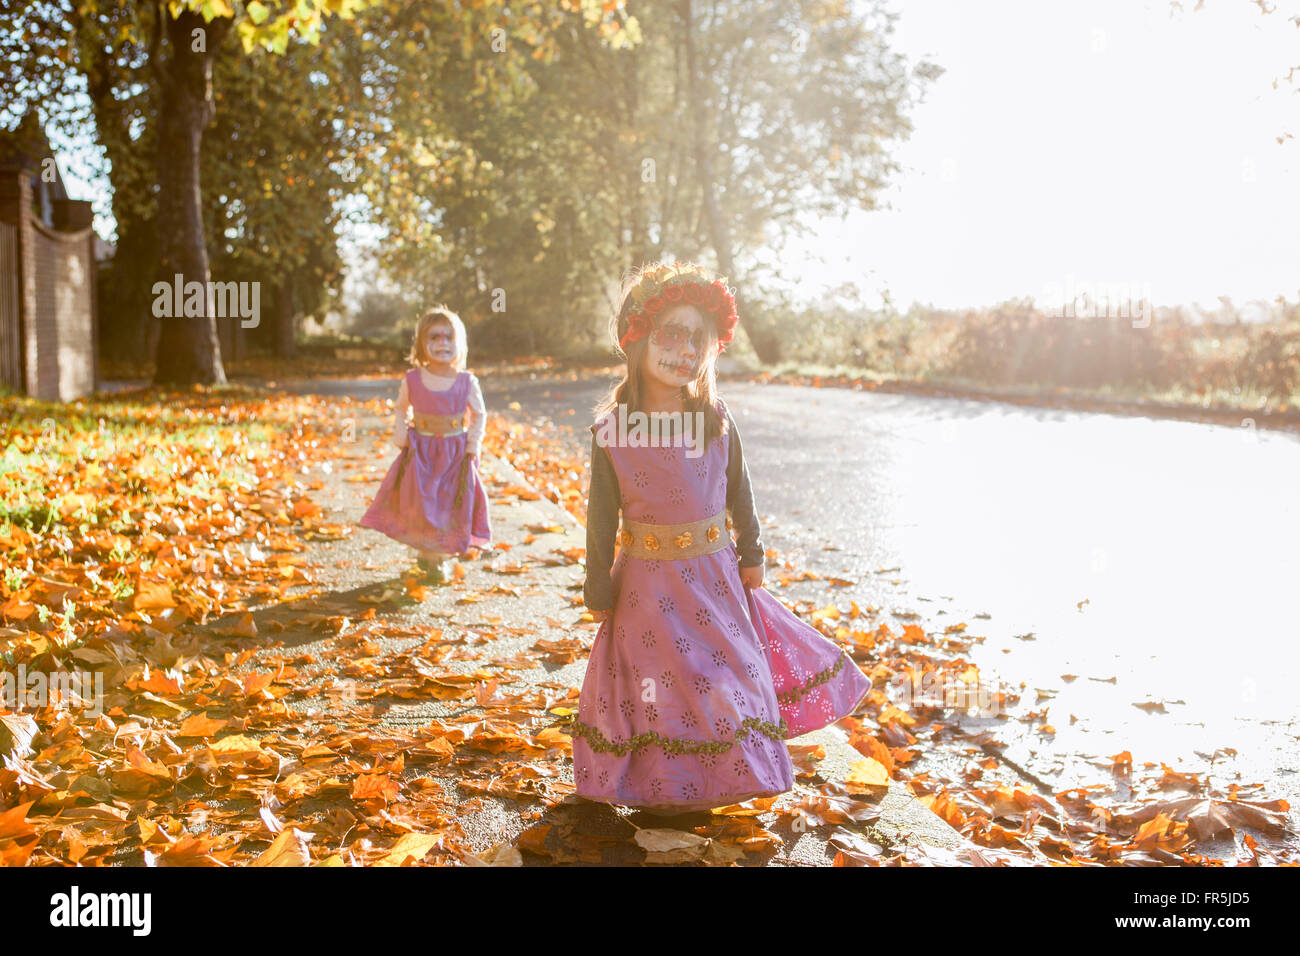 Toddler girls in Halloween costumes walking in autumn leaves Stock Photo